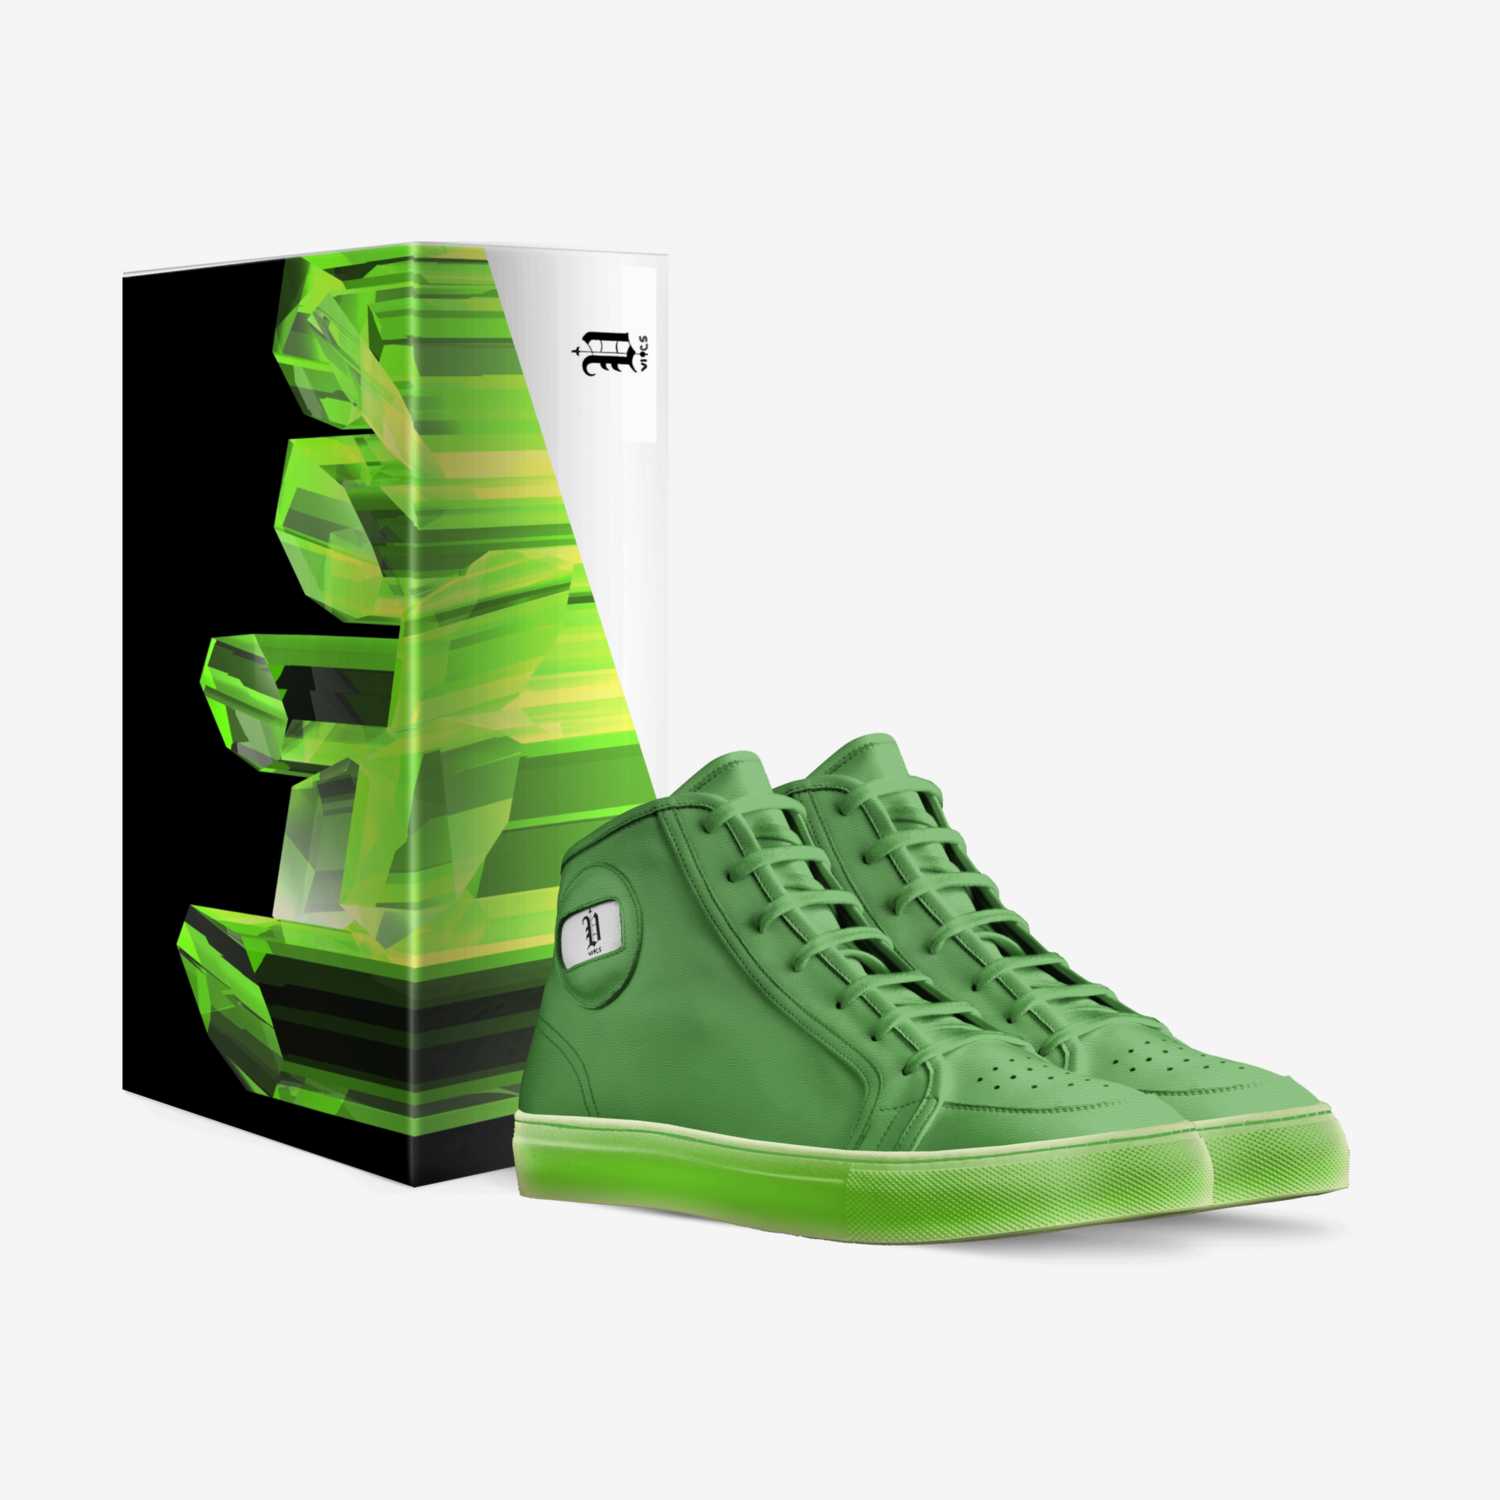 vics kryptonite custom made in Italy shoes by Brayden Murphy | Box view